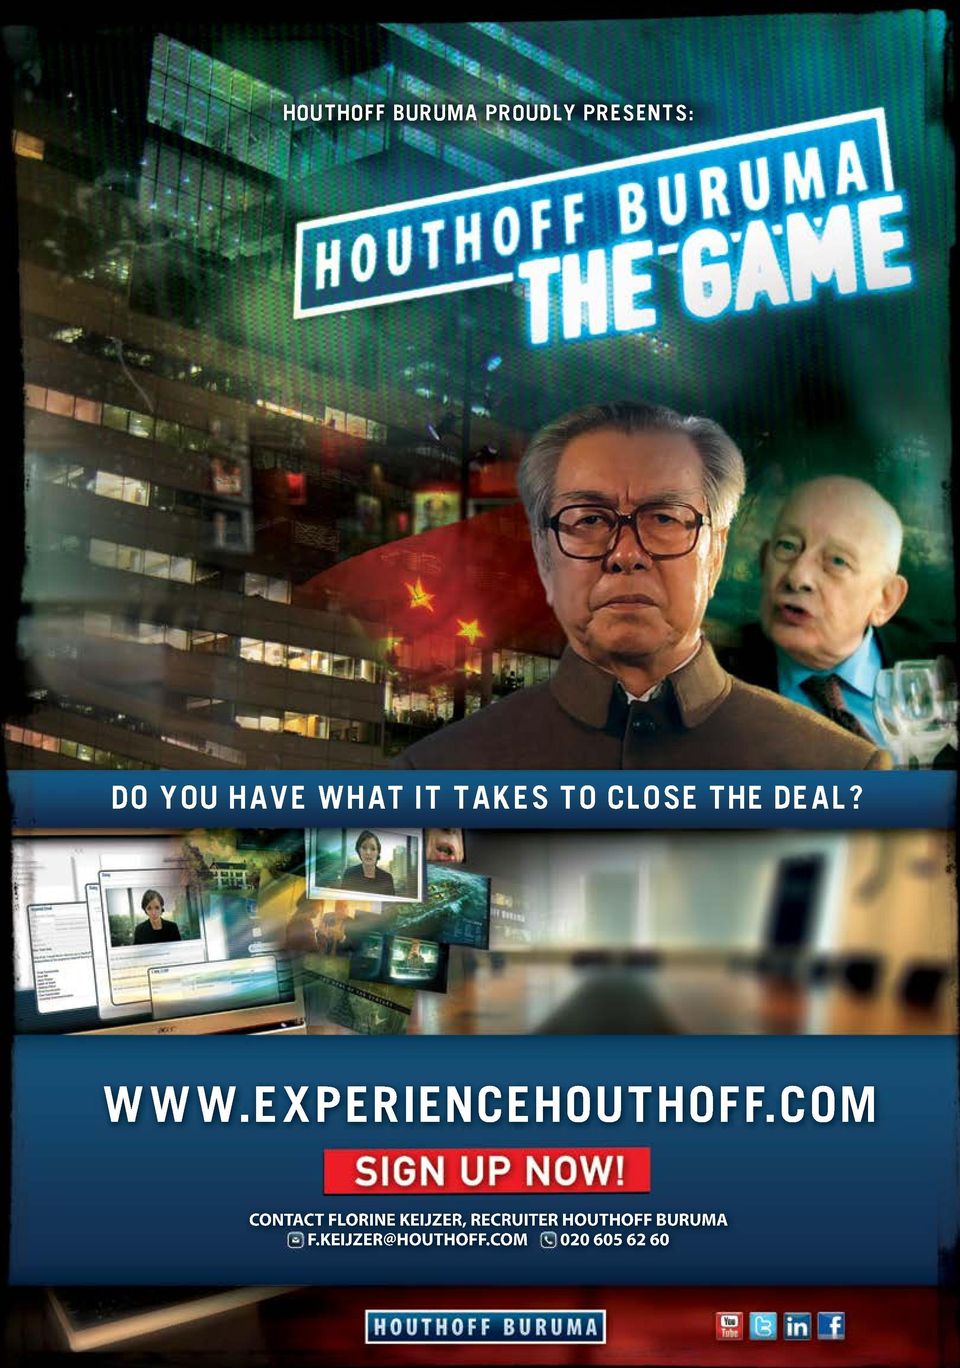 EXPERIENCEHOUTHOFF.